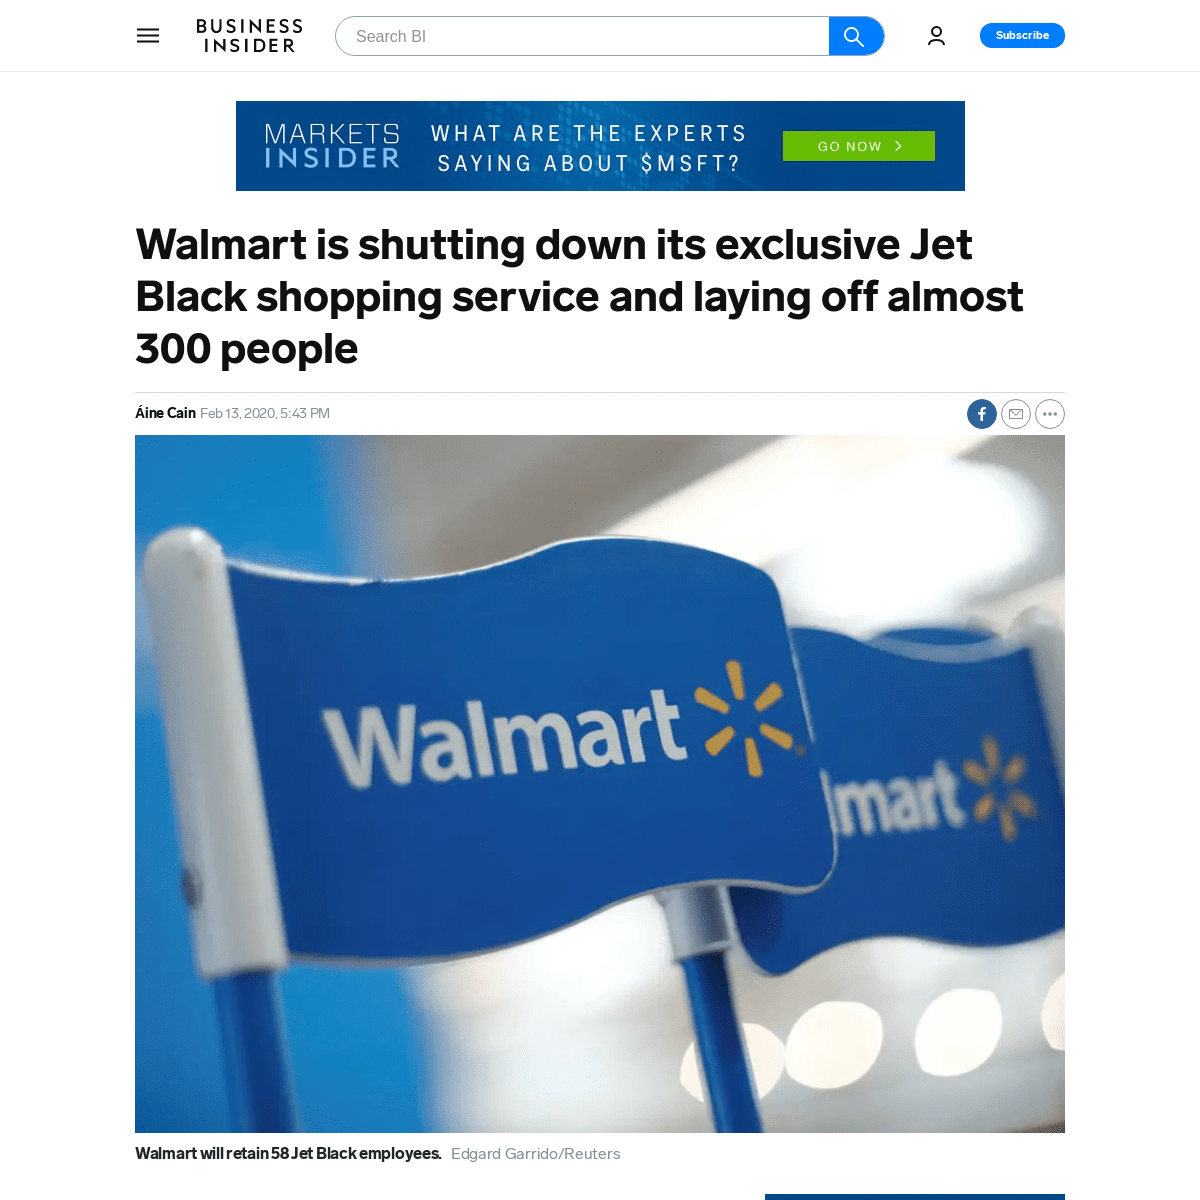 A complete backup of www.businessinsider.com/walmarts-jetblack-service-shutting-down-laying-off-workers-2020-2